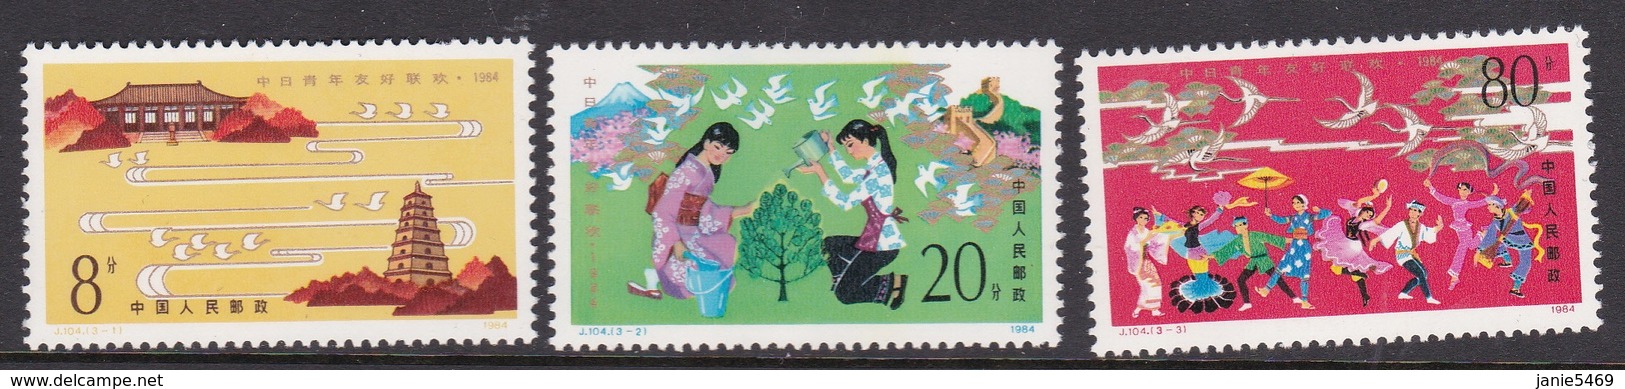 China People's Republic SG 3340-3342 1984 Youth Friendship Festival, Mint Never Hinged - Unused Stamps